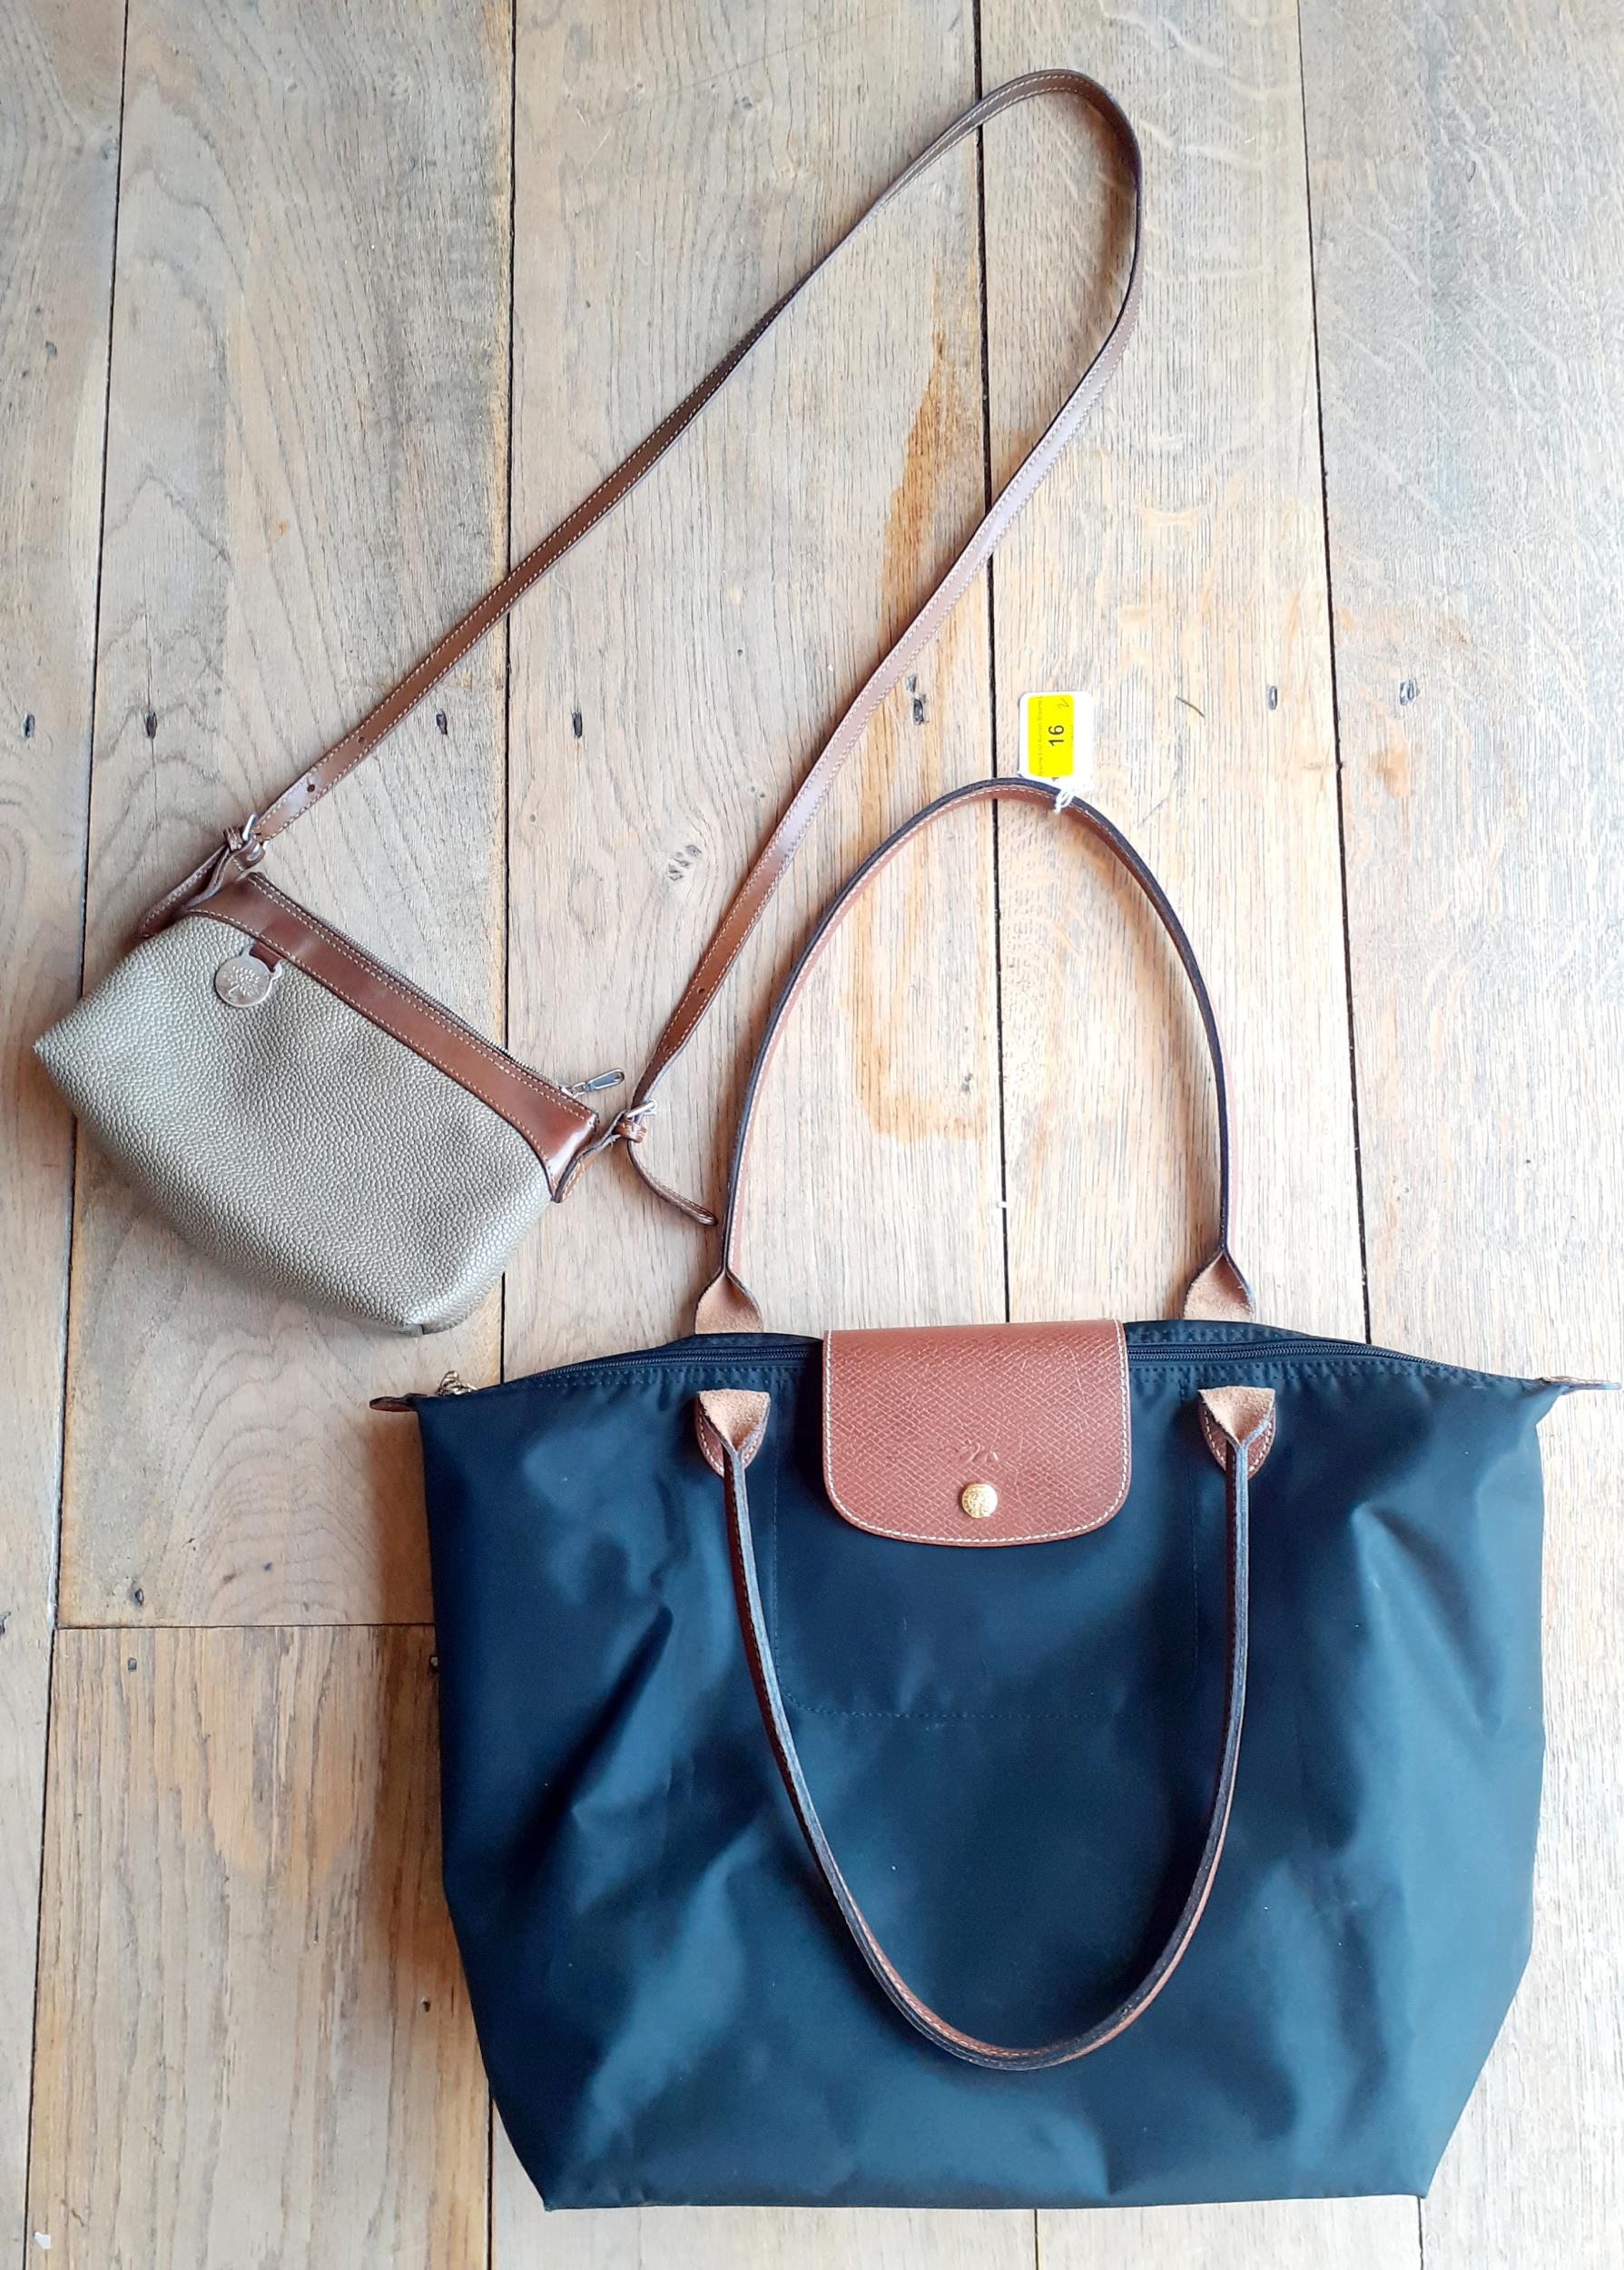 Longchamp and Mulberry- Le Pliage Medium size lightweight tote shoulder bag adaptable from a small